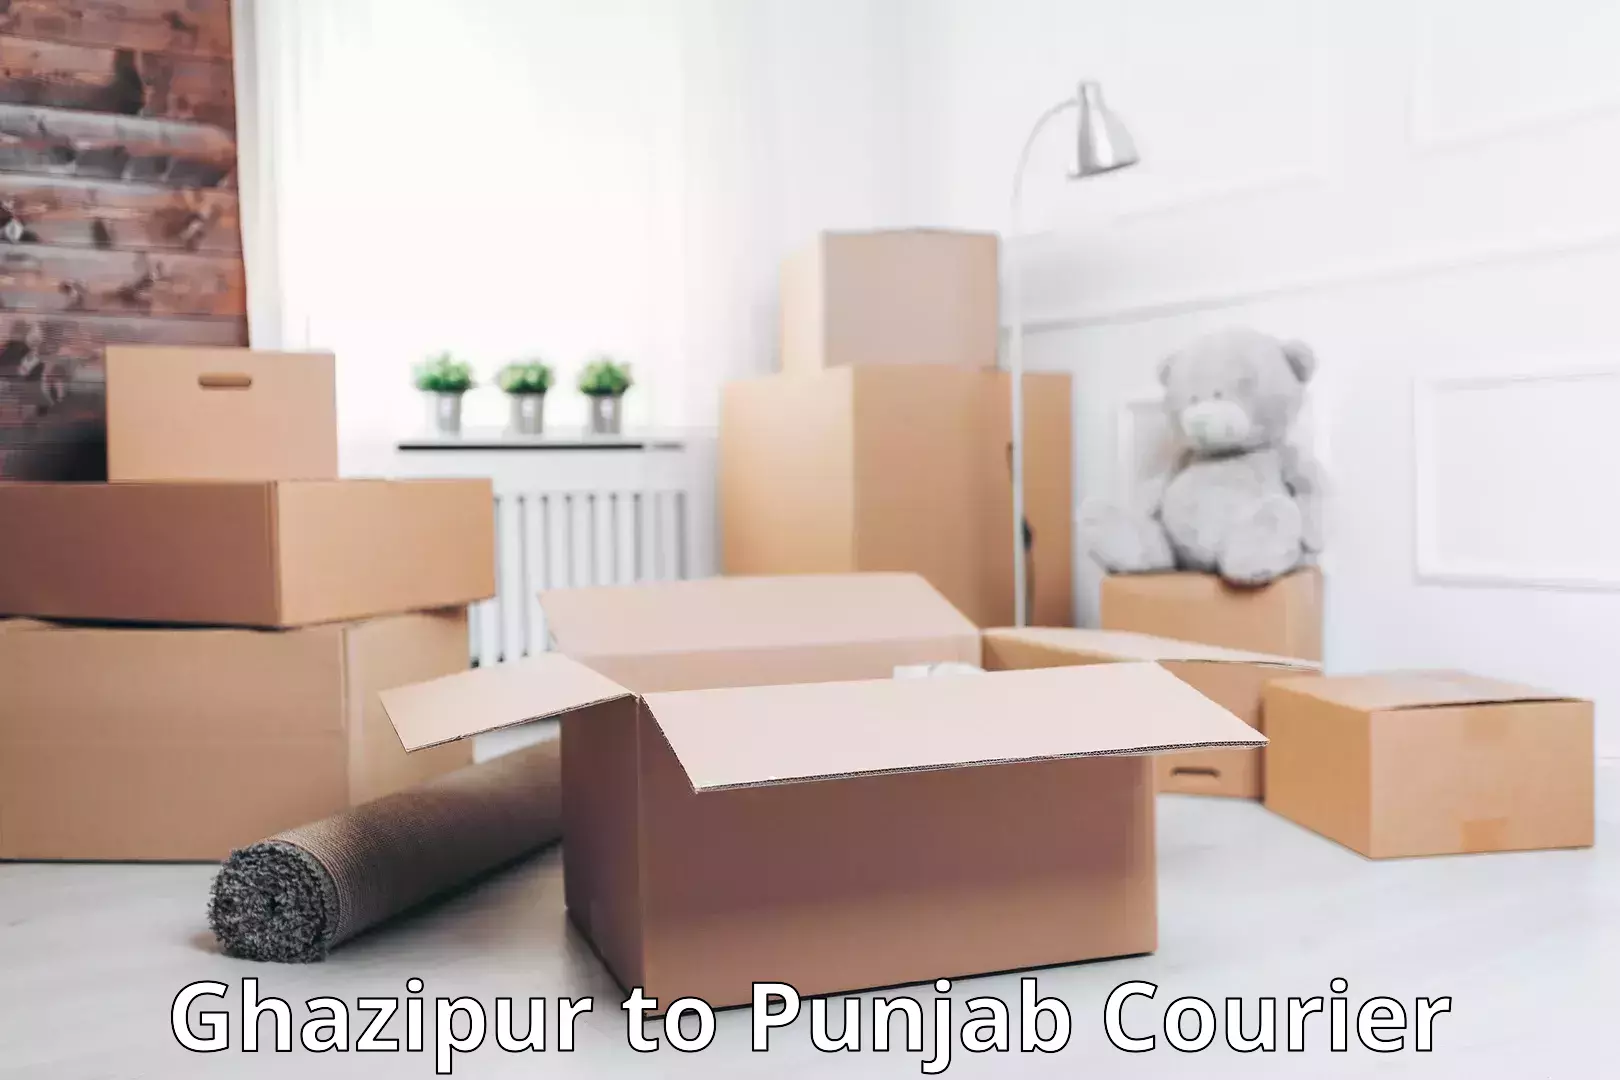 Luggage shipment specialists Ghazipur to Punjab